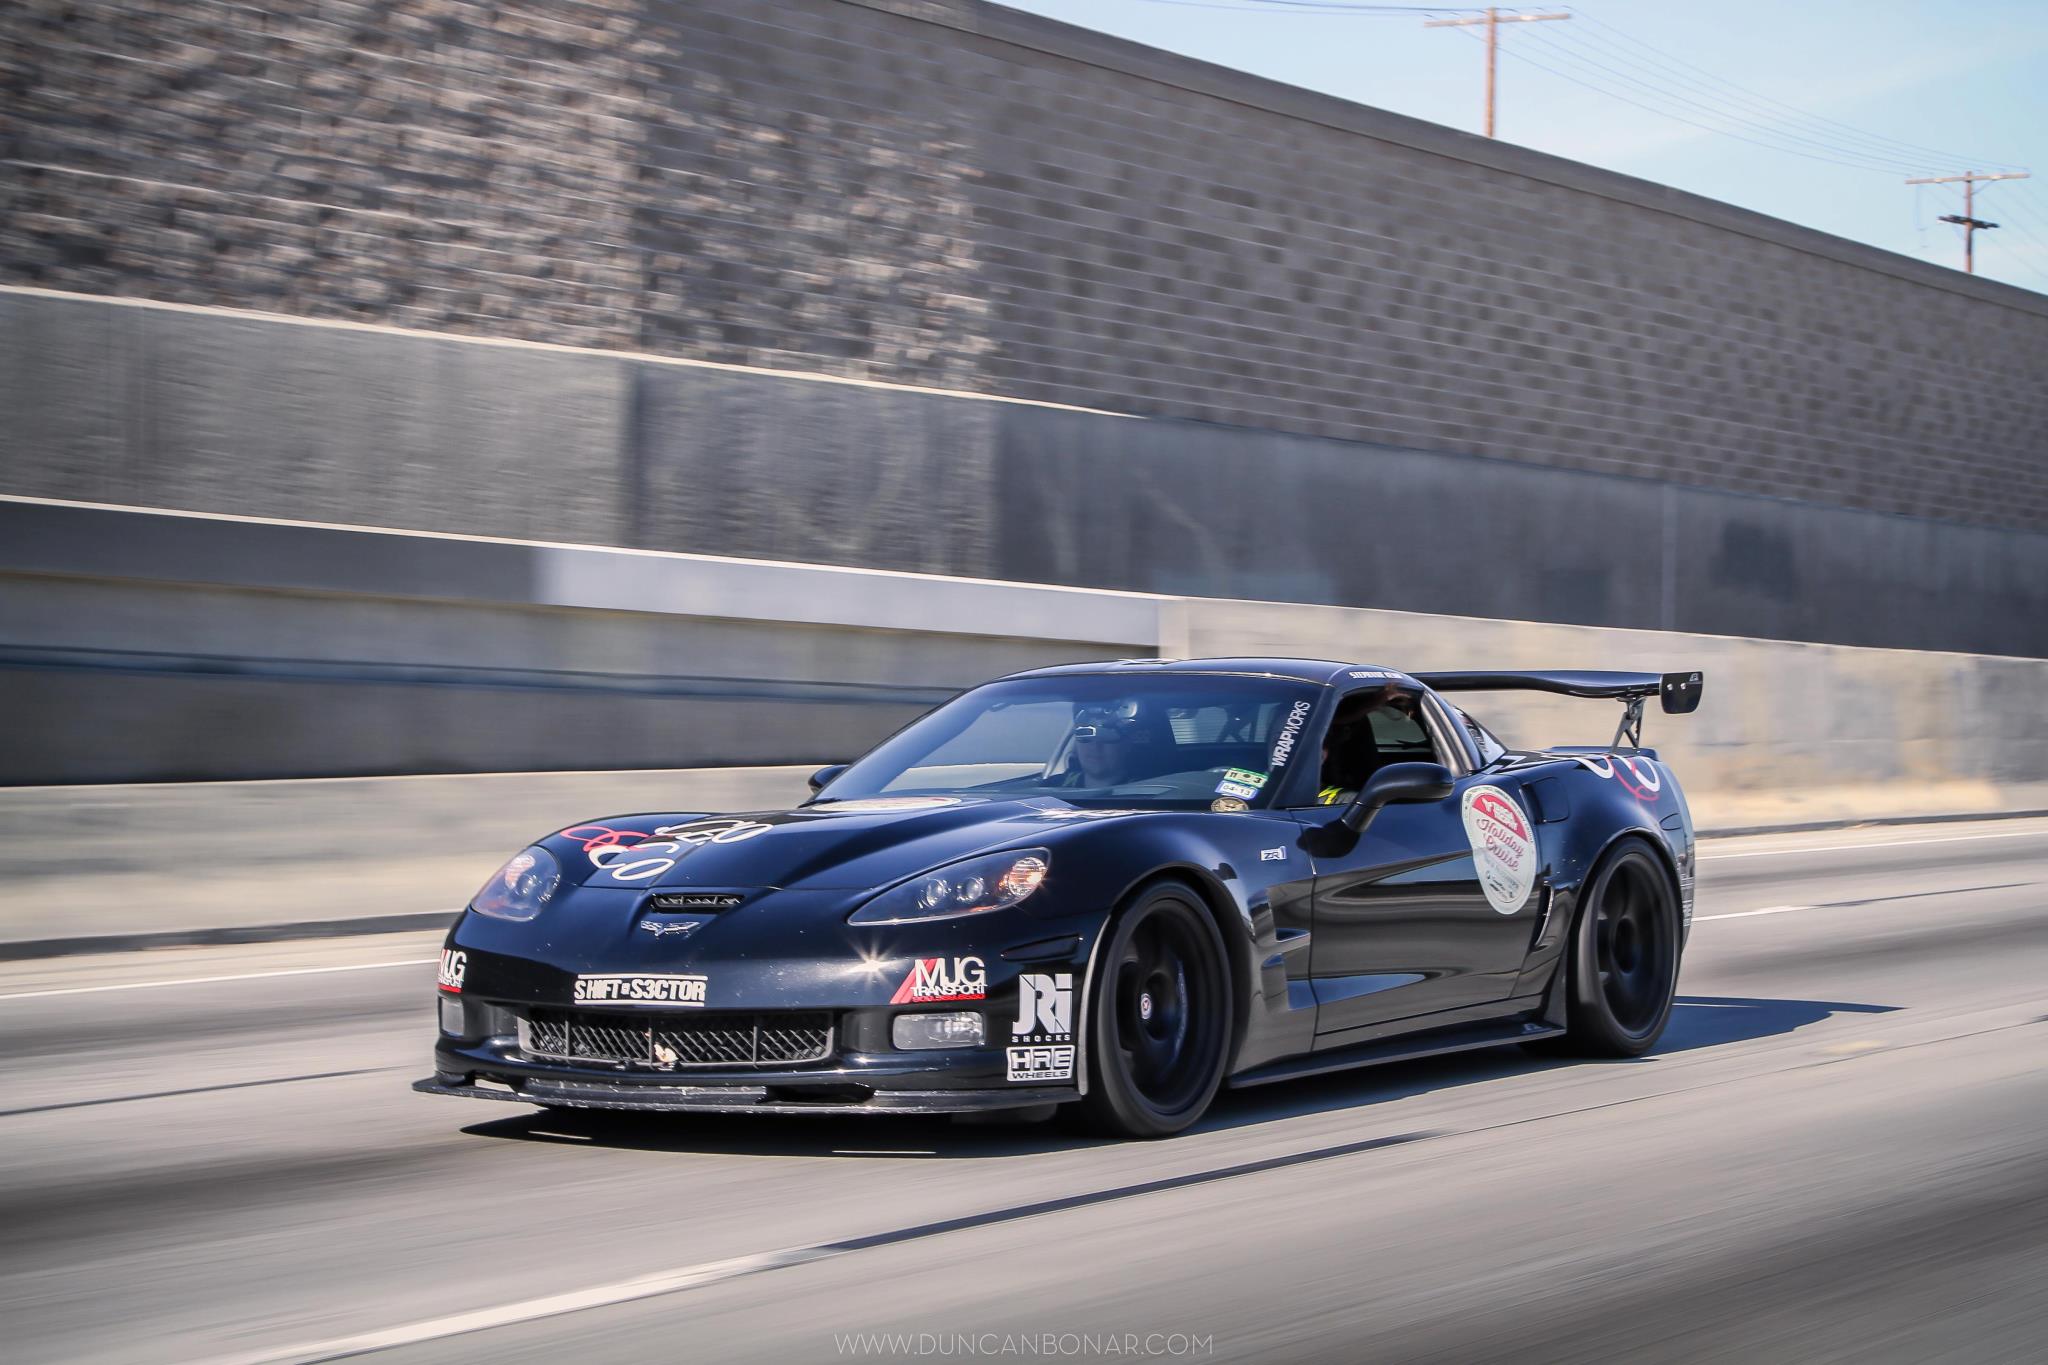 Video: ZR1 Versus Stock Car Ends in a Spinout